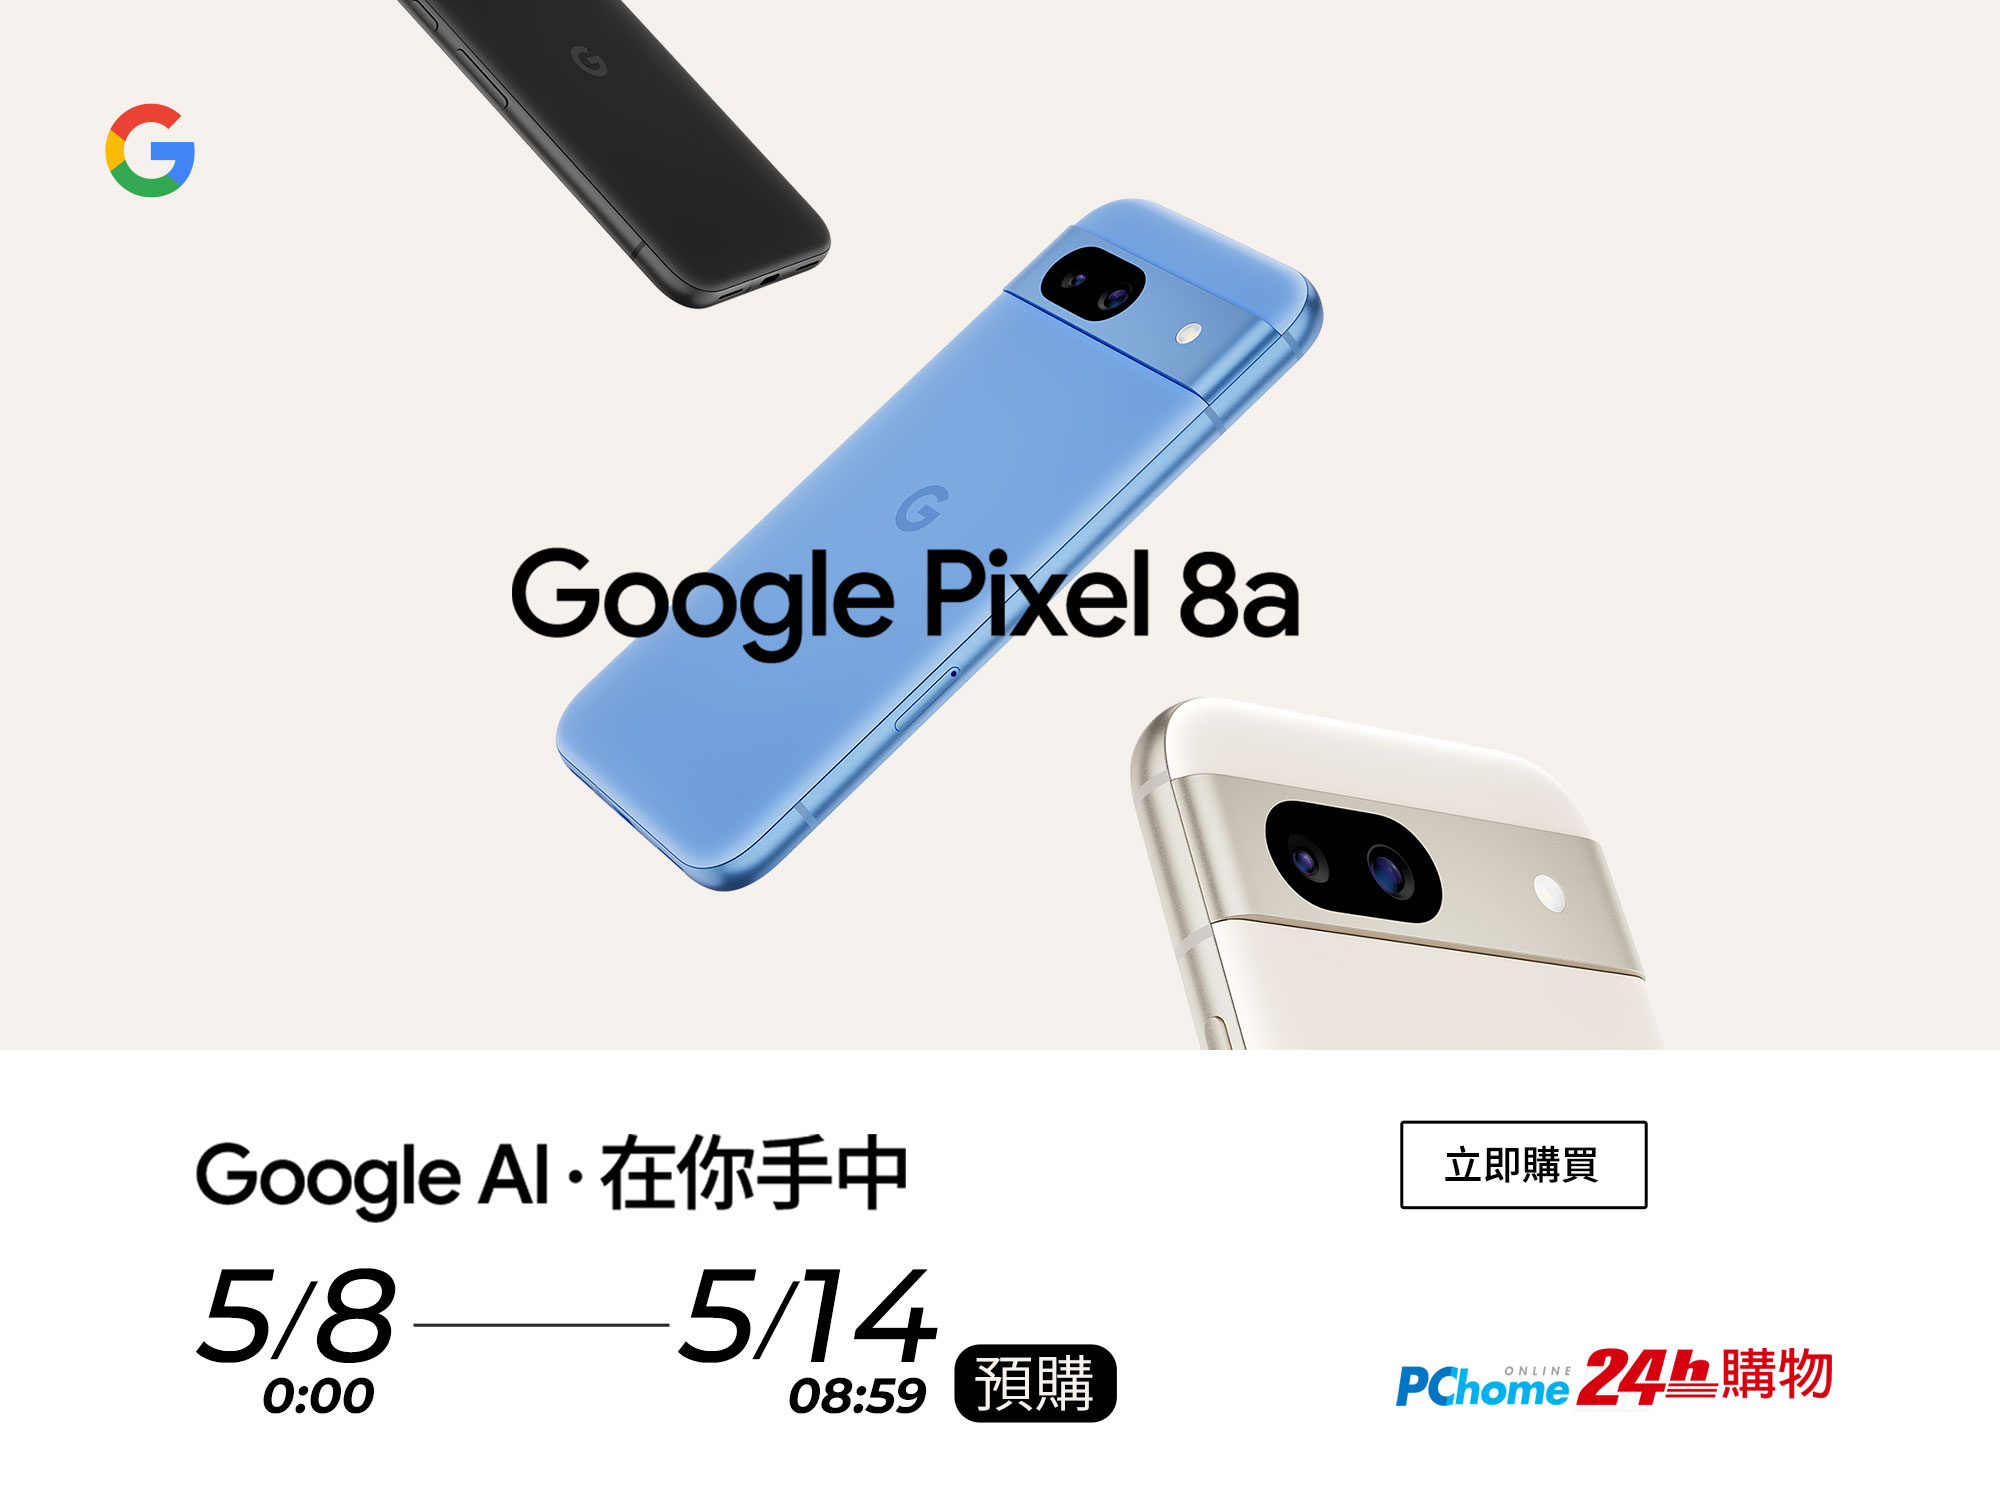 Google AI At Your Fingertips; PChome 24h Shopping Offers Pre-orders for Google Pixel 8a from May 8th to May 14th